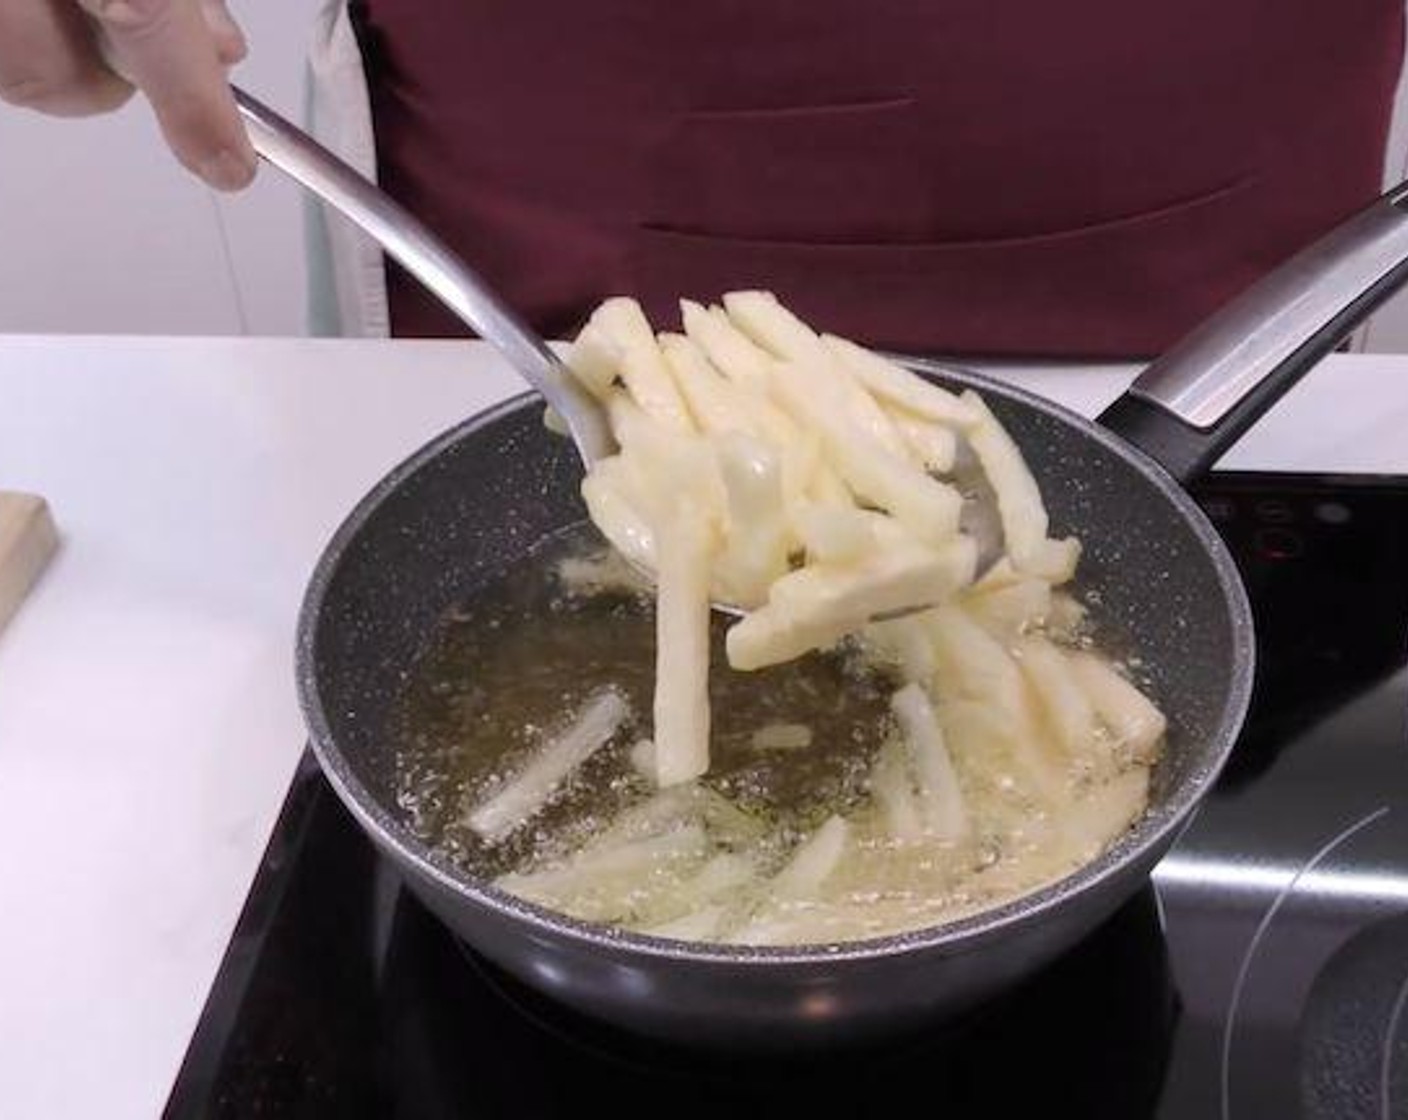 step 5 Once the fries are almost fully cooked remove from the pan and place in a bowl. Bring the oil up to high heat and put the fries back in the oil until golden brown.